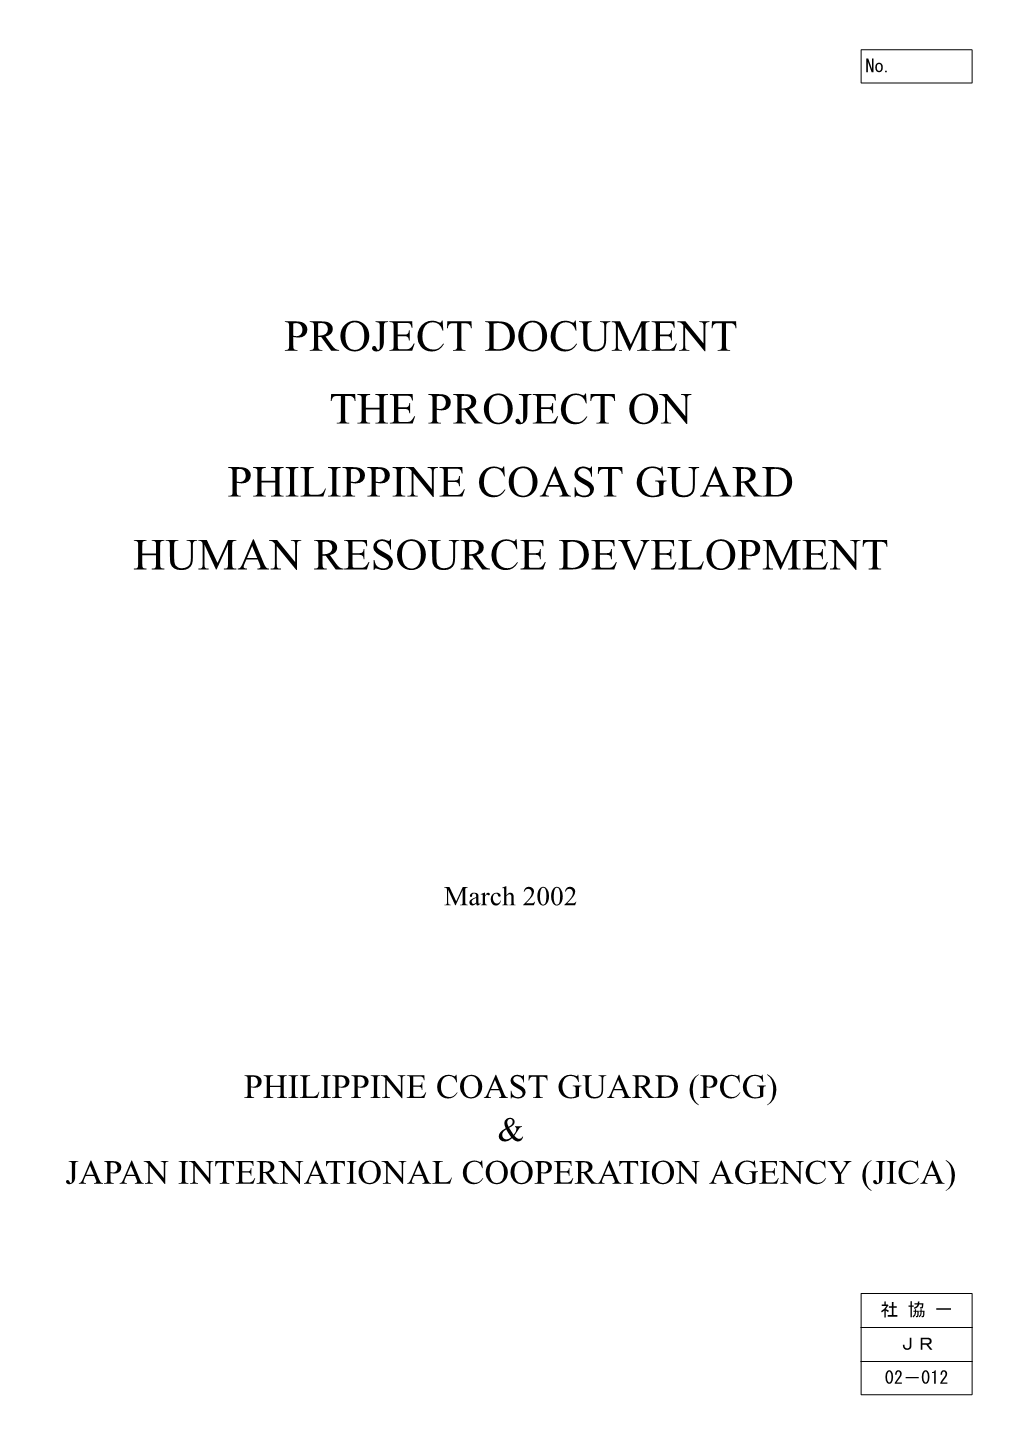 Project Document the Project on Philippine Coast Guard Human Resource Development